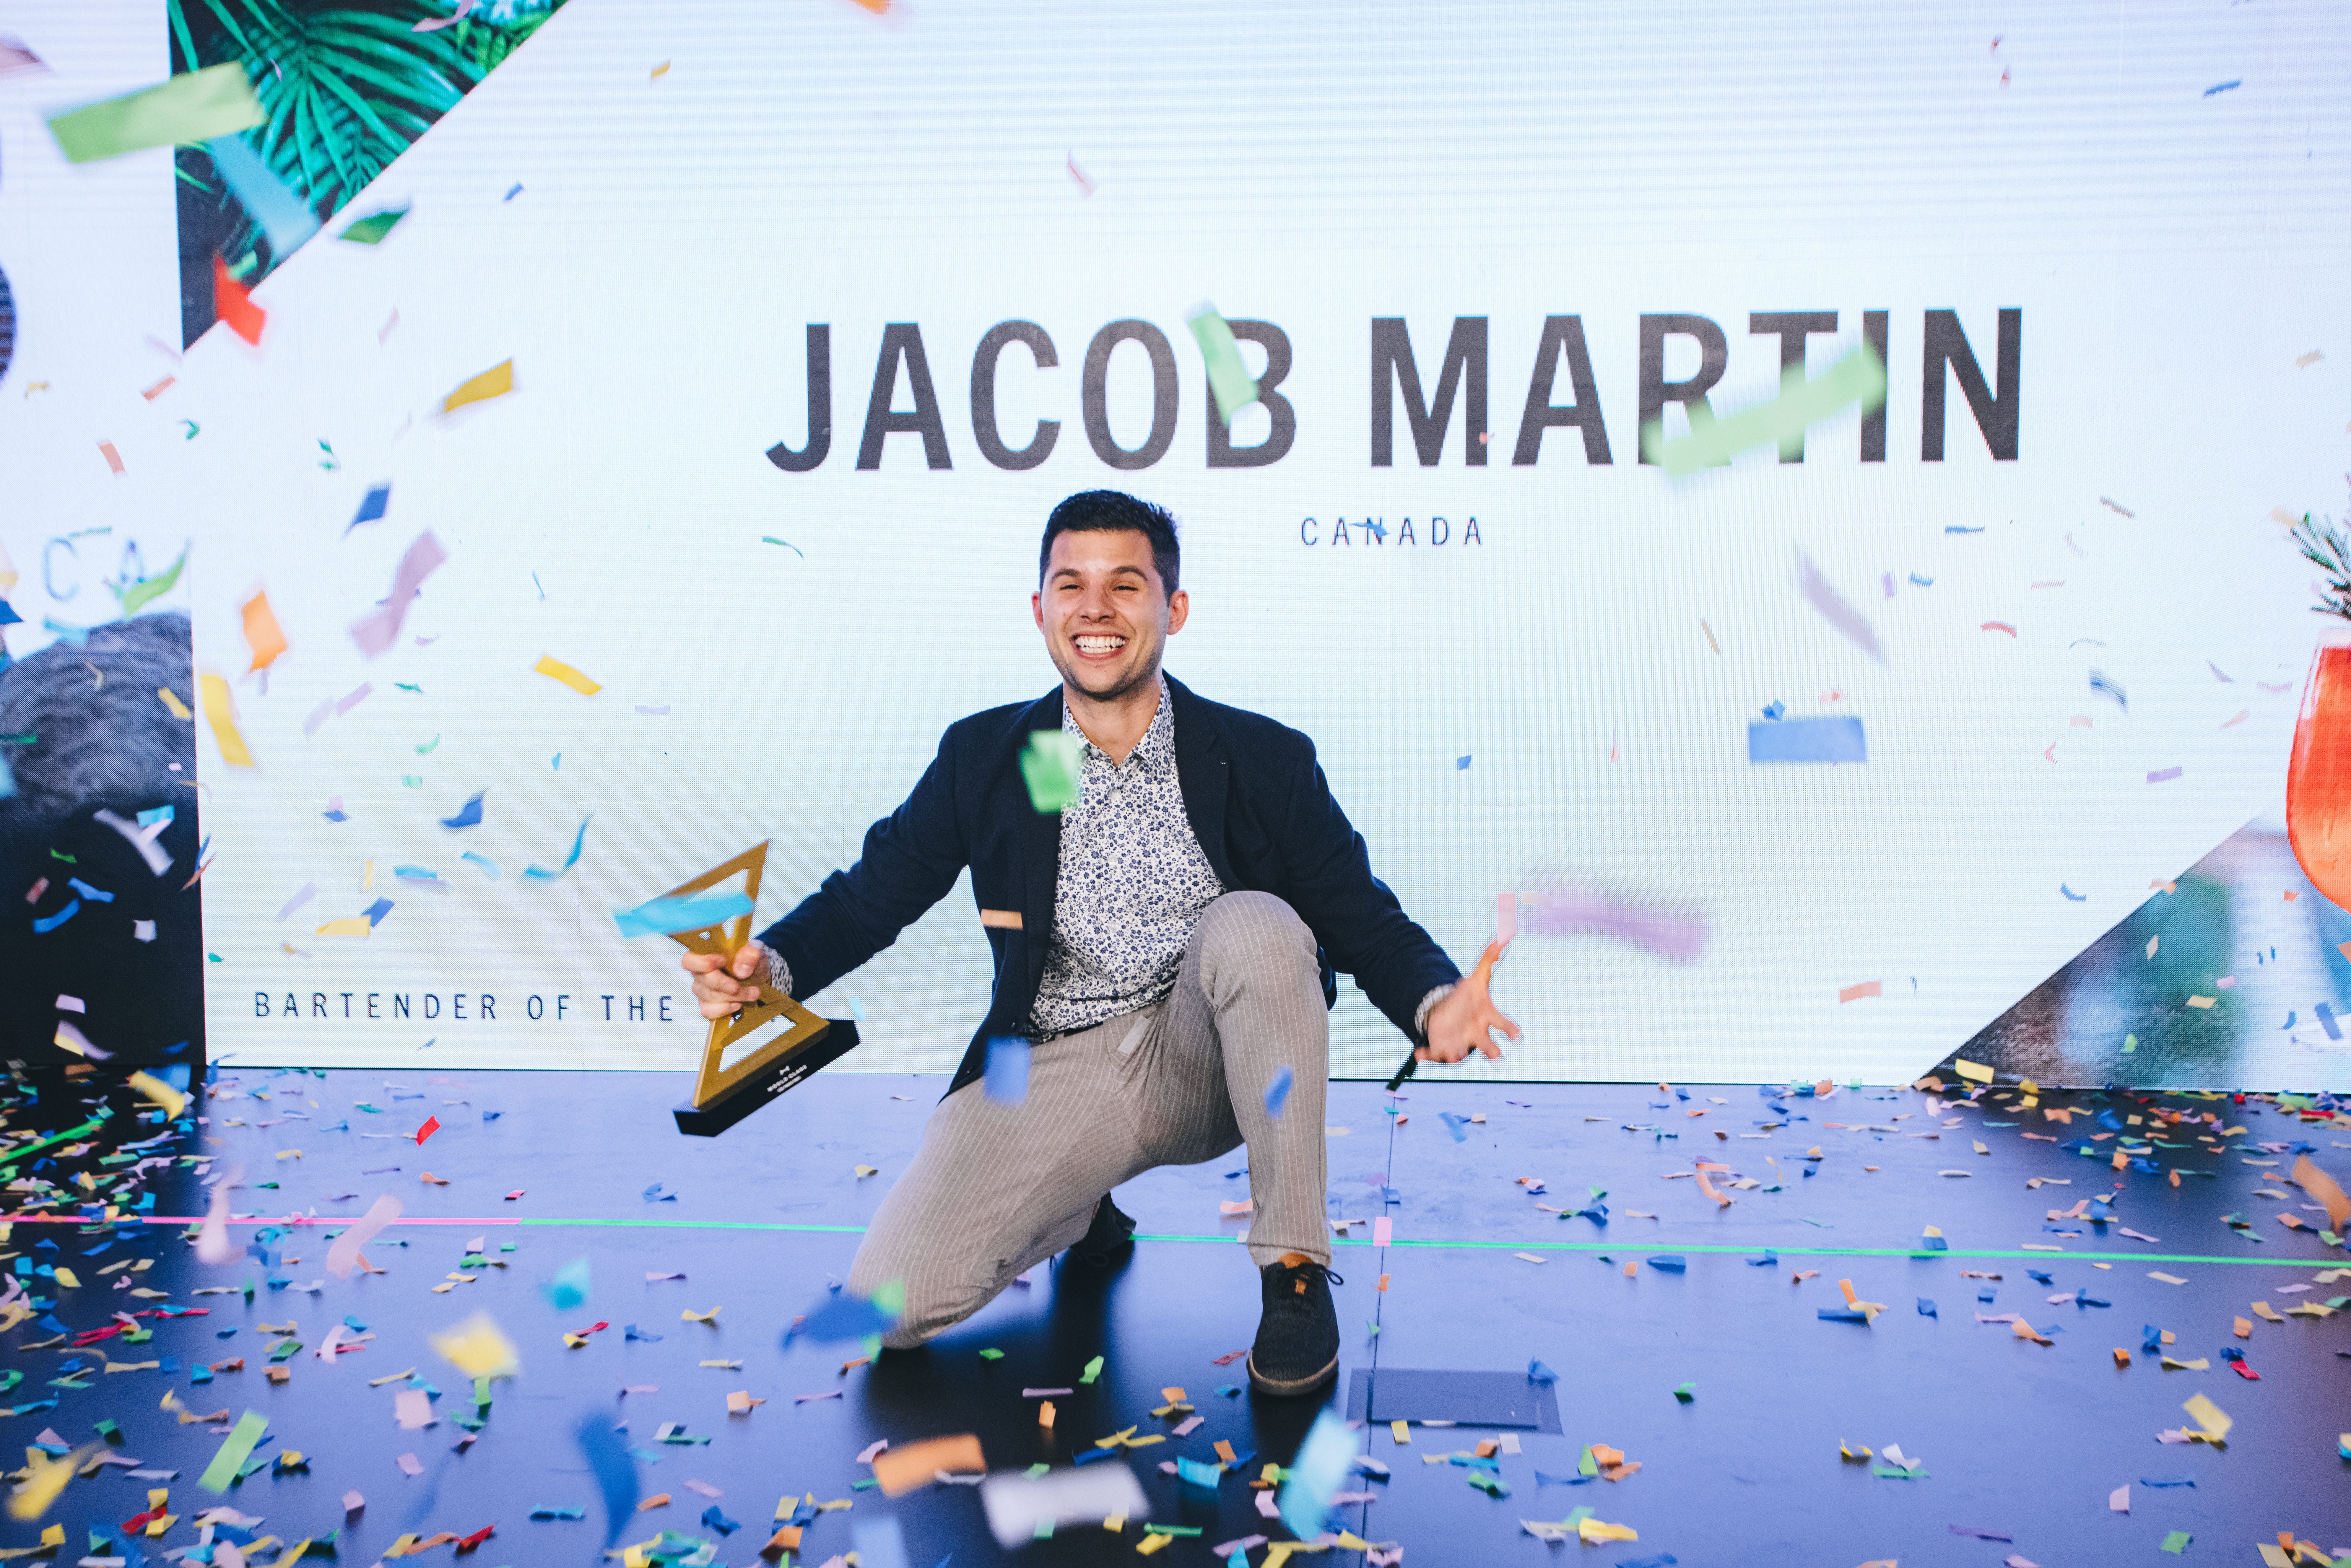 Jacob Martin celebrates his win at the World Class Global Bartender of the Year awards.